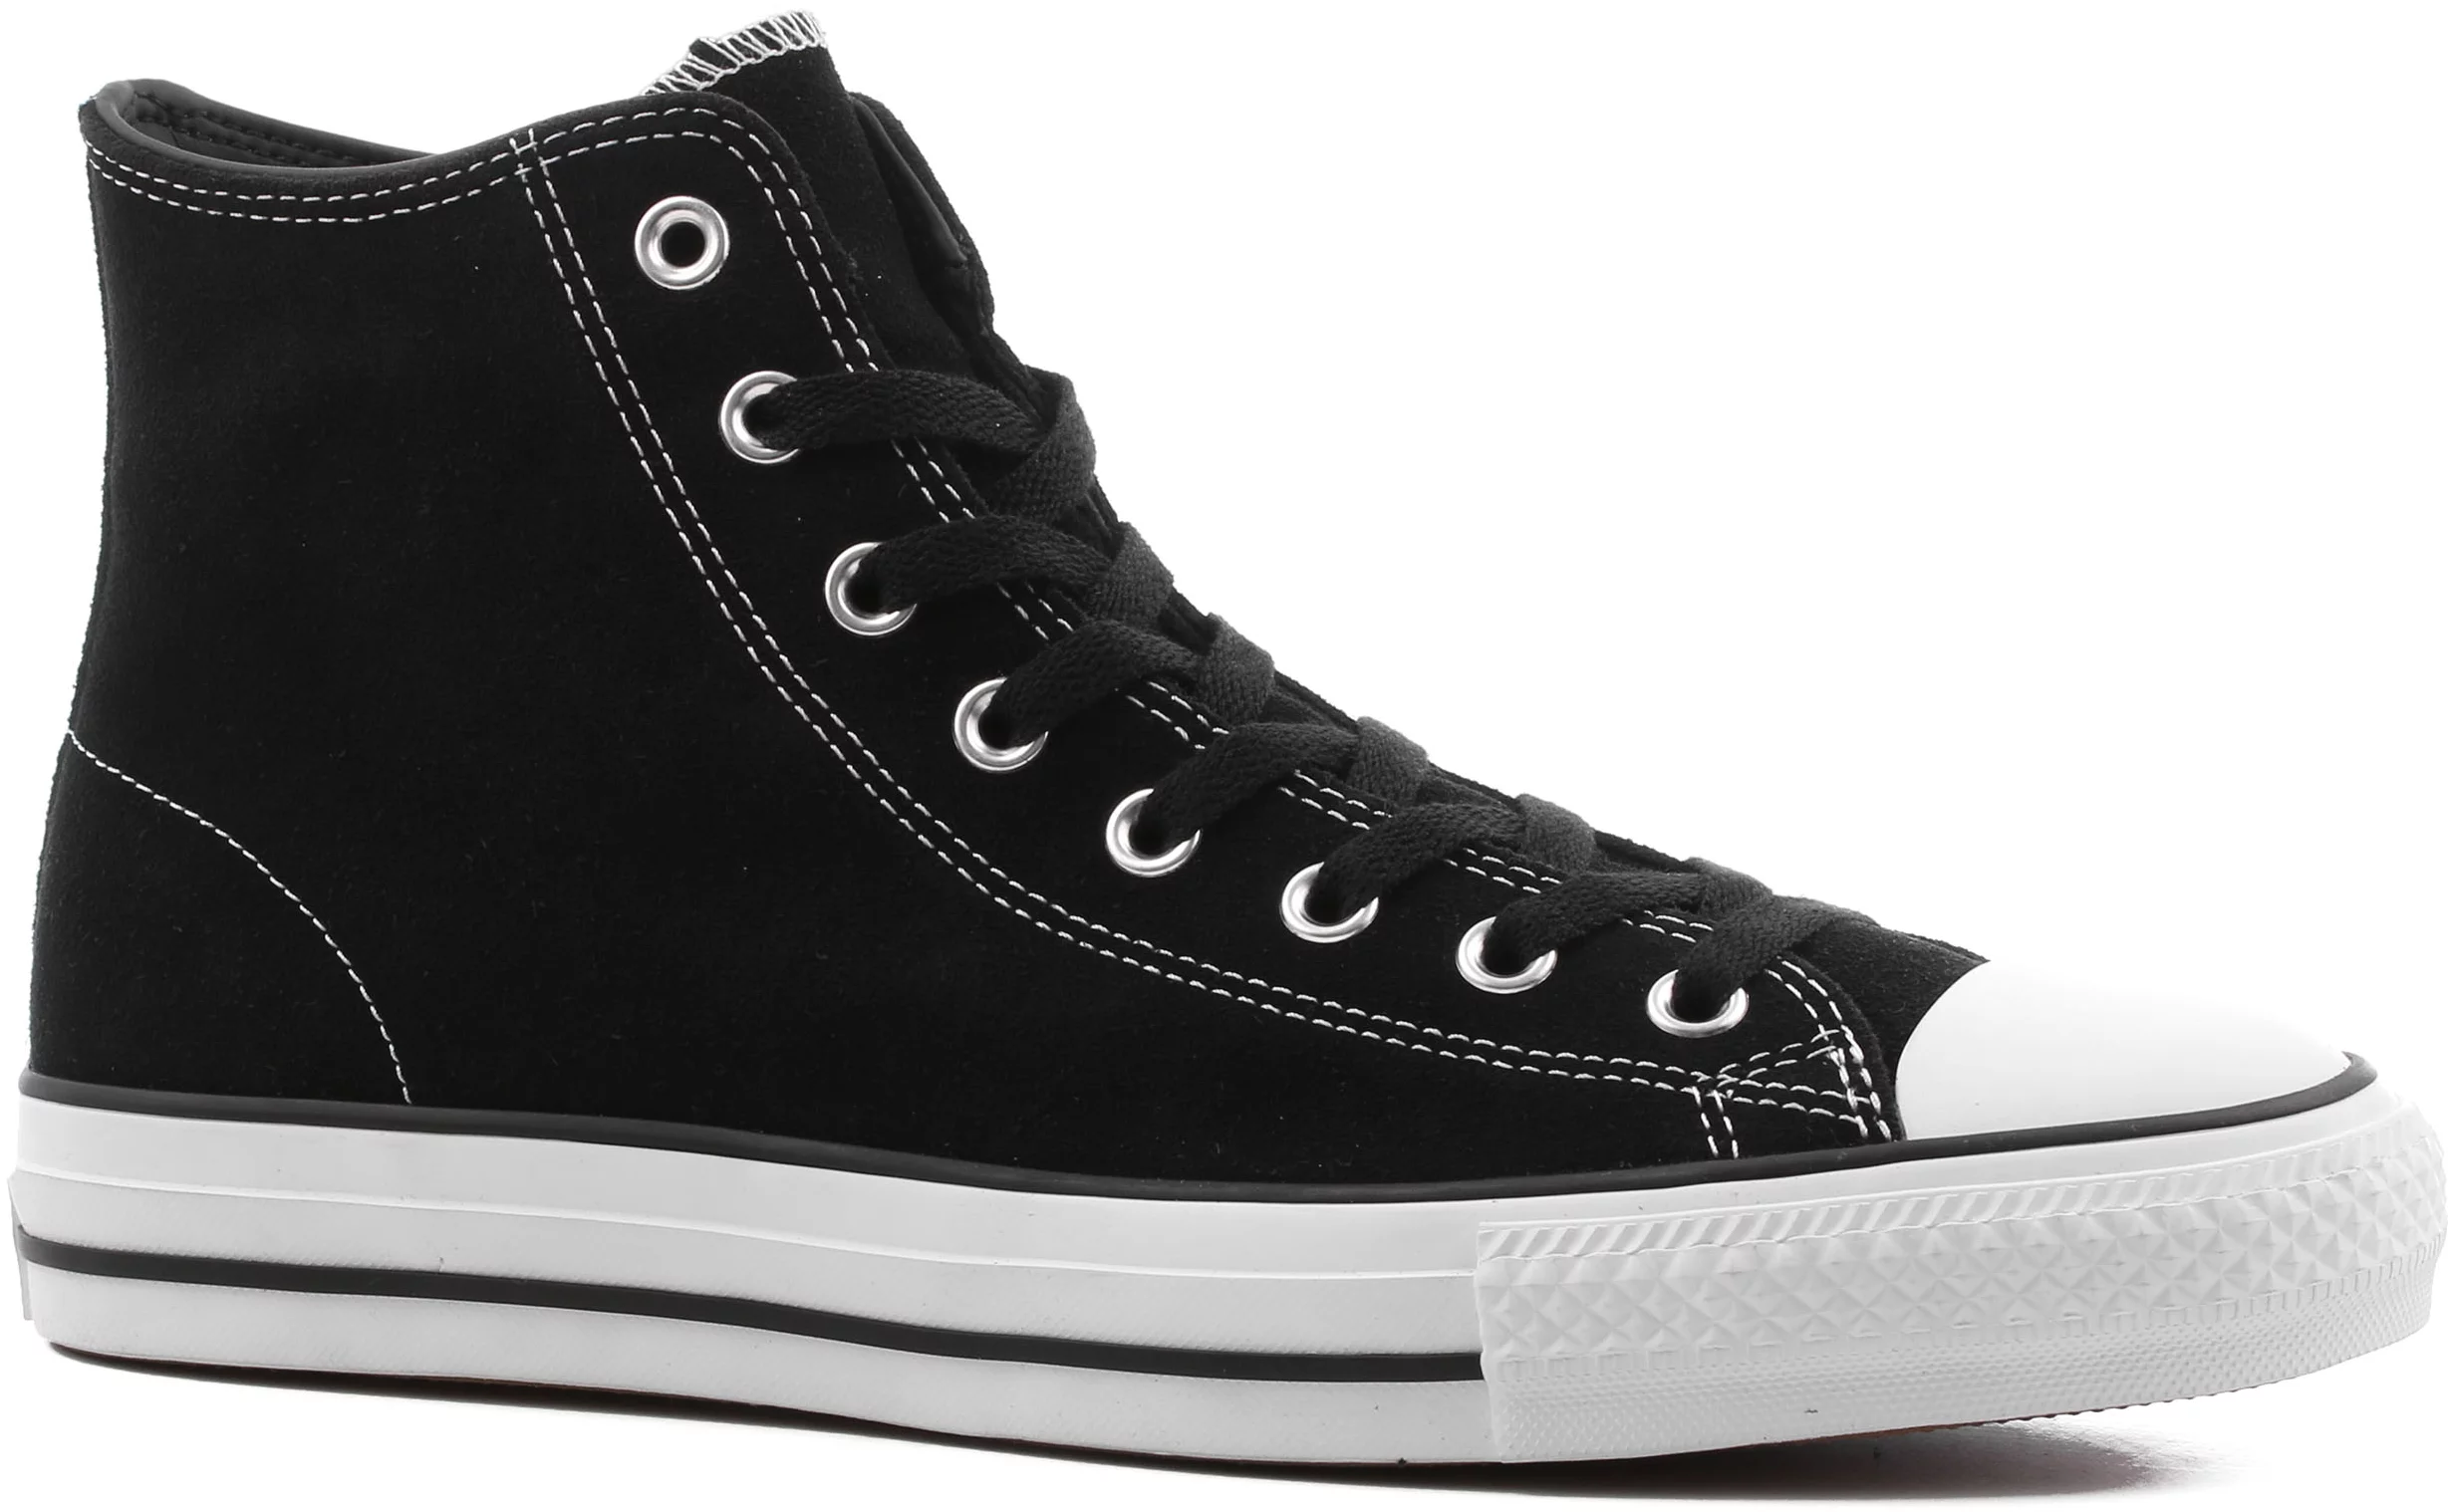 oplichter Specialist Pilfer Converse Chuck Taylor All Star Pro High Skate Shoes - (suede)  black/black/white - Free Shipping | Tactics